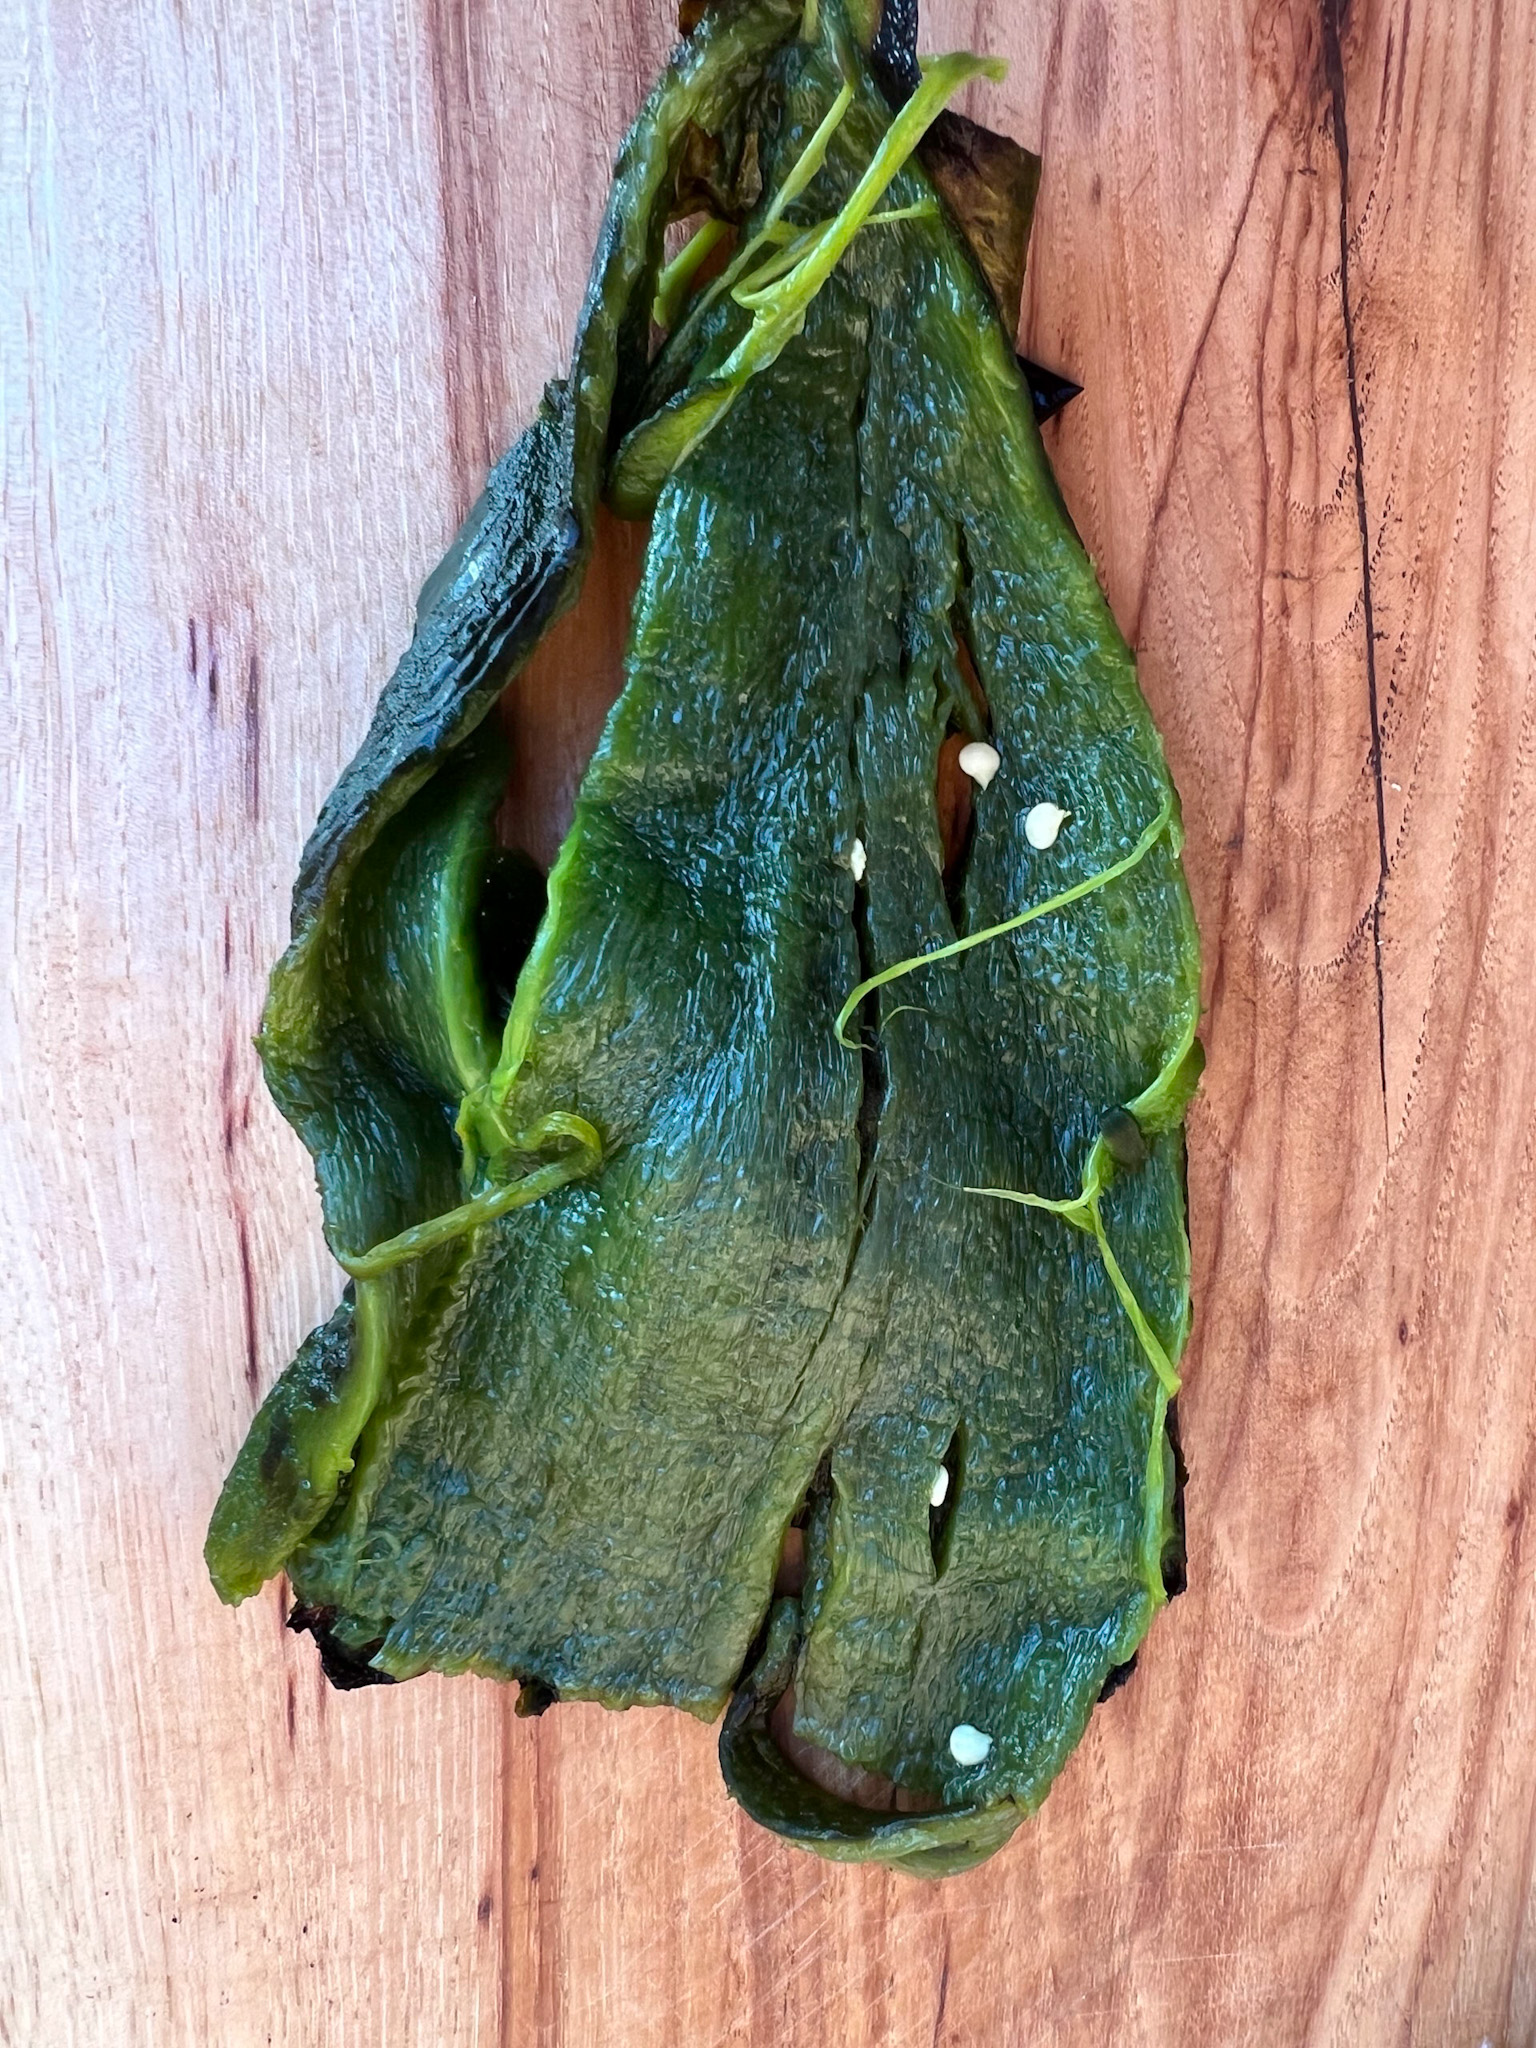 poblano peeled and seeded